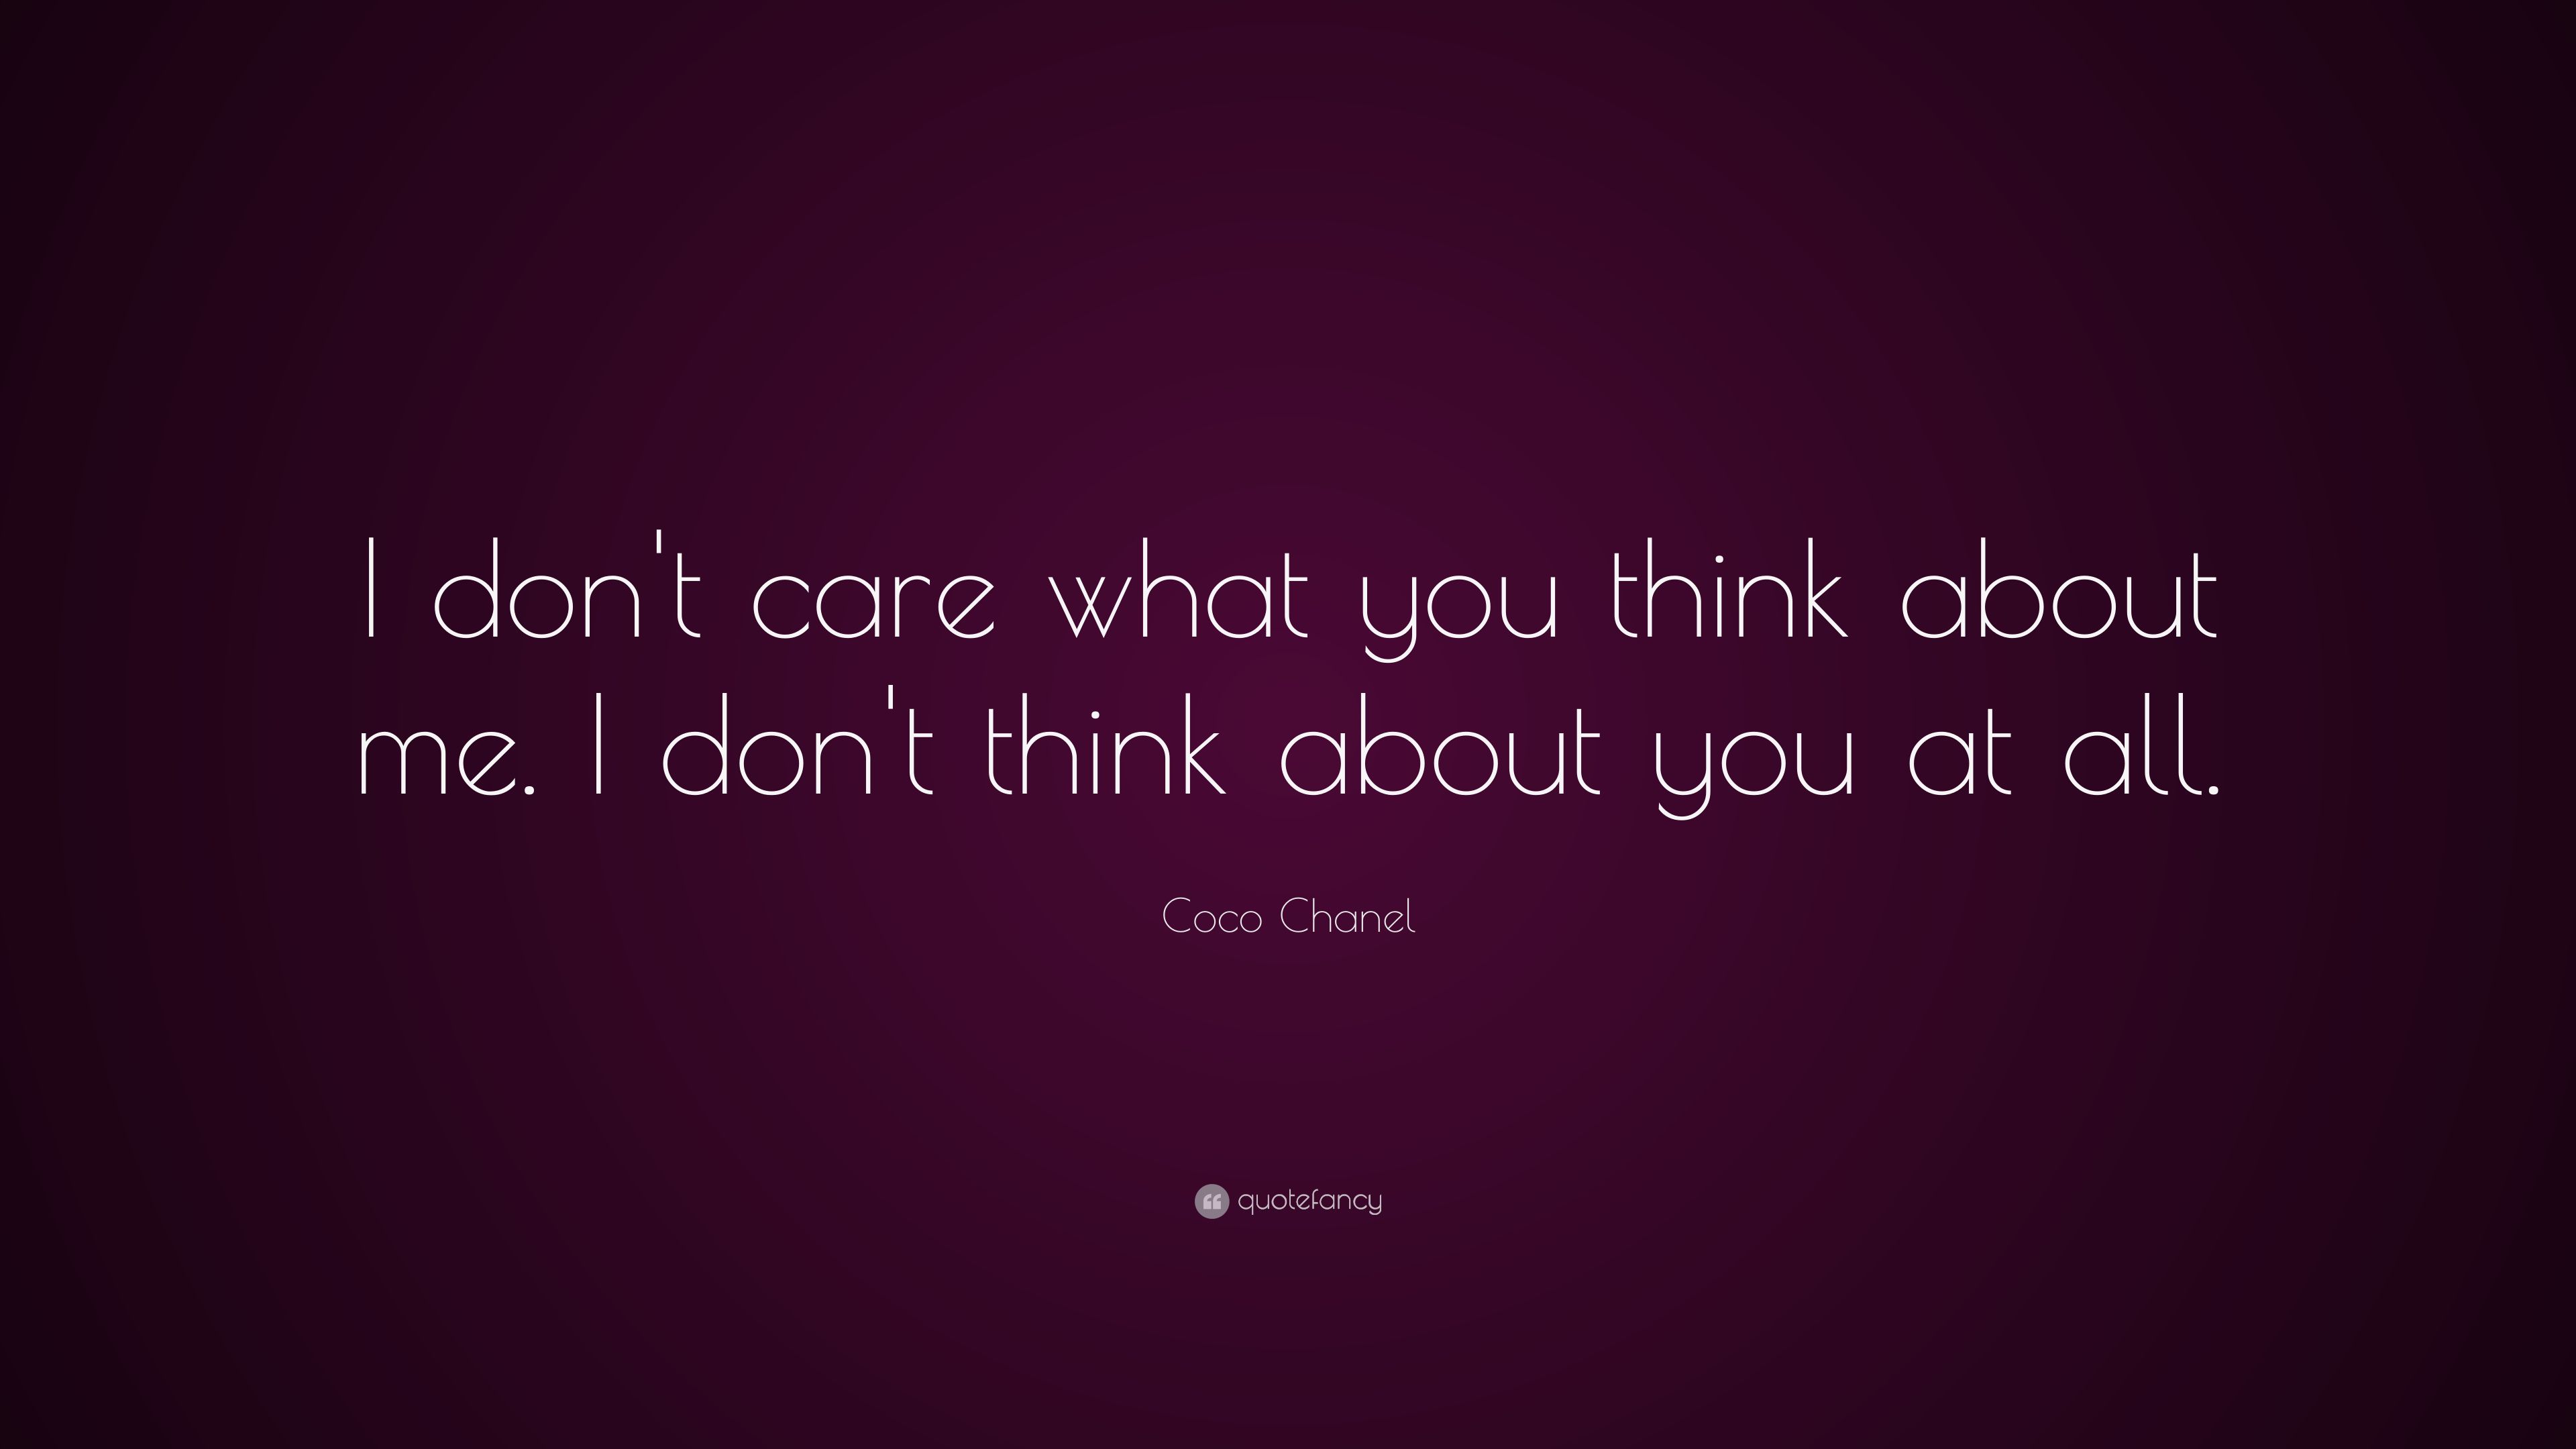 Coco Chanel Quote: “I don't care what you think about me. I don't think about you at all.” (29 wallpaper)